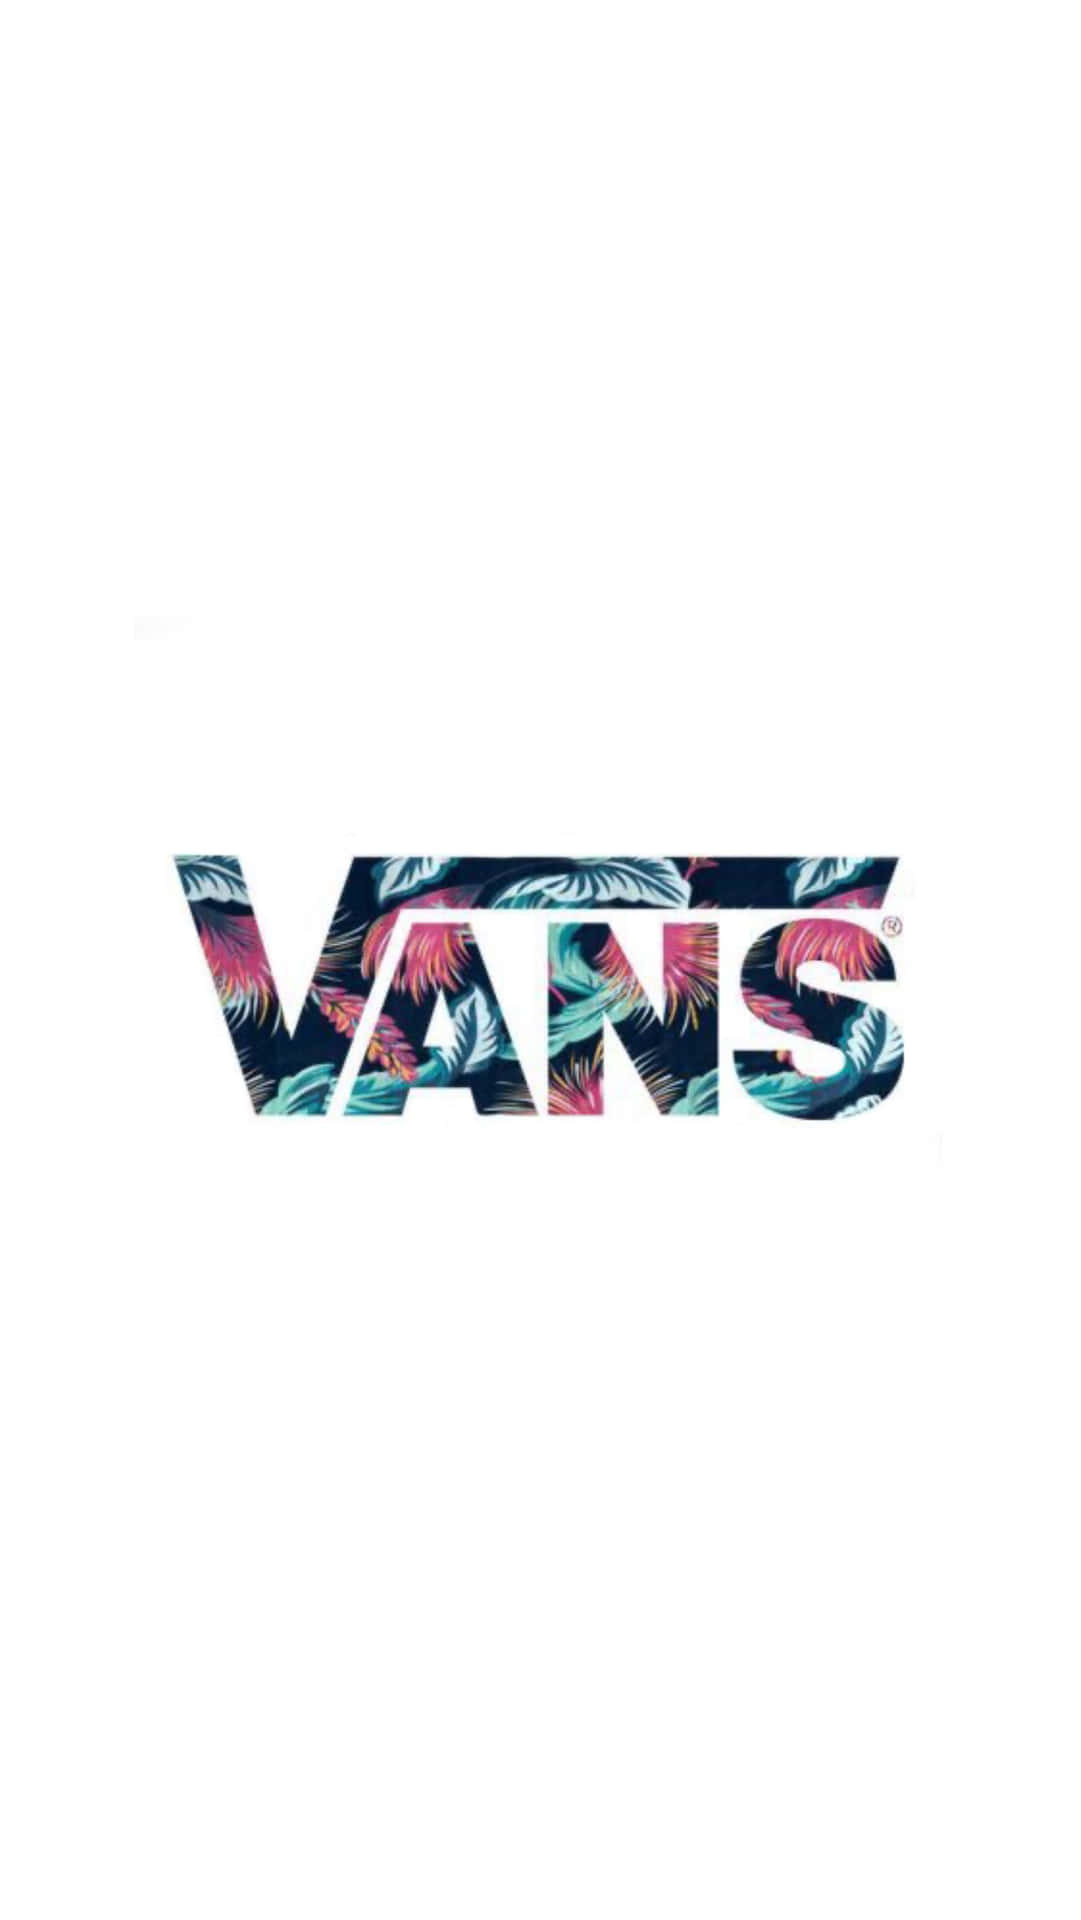 Show off your individuality and style in a pair of Vans shoes!